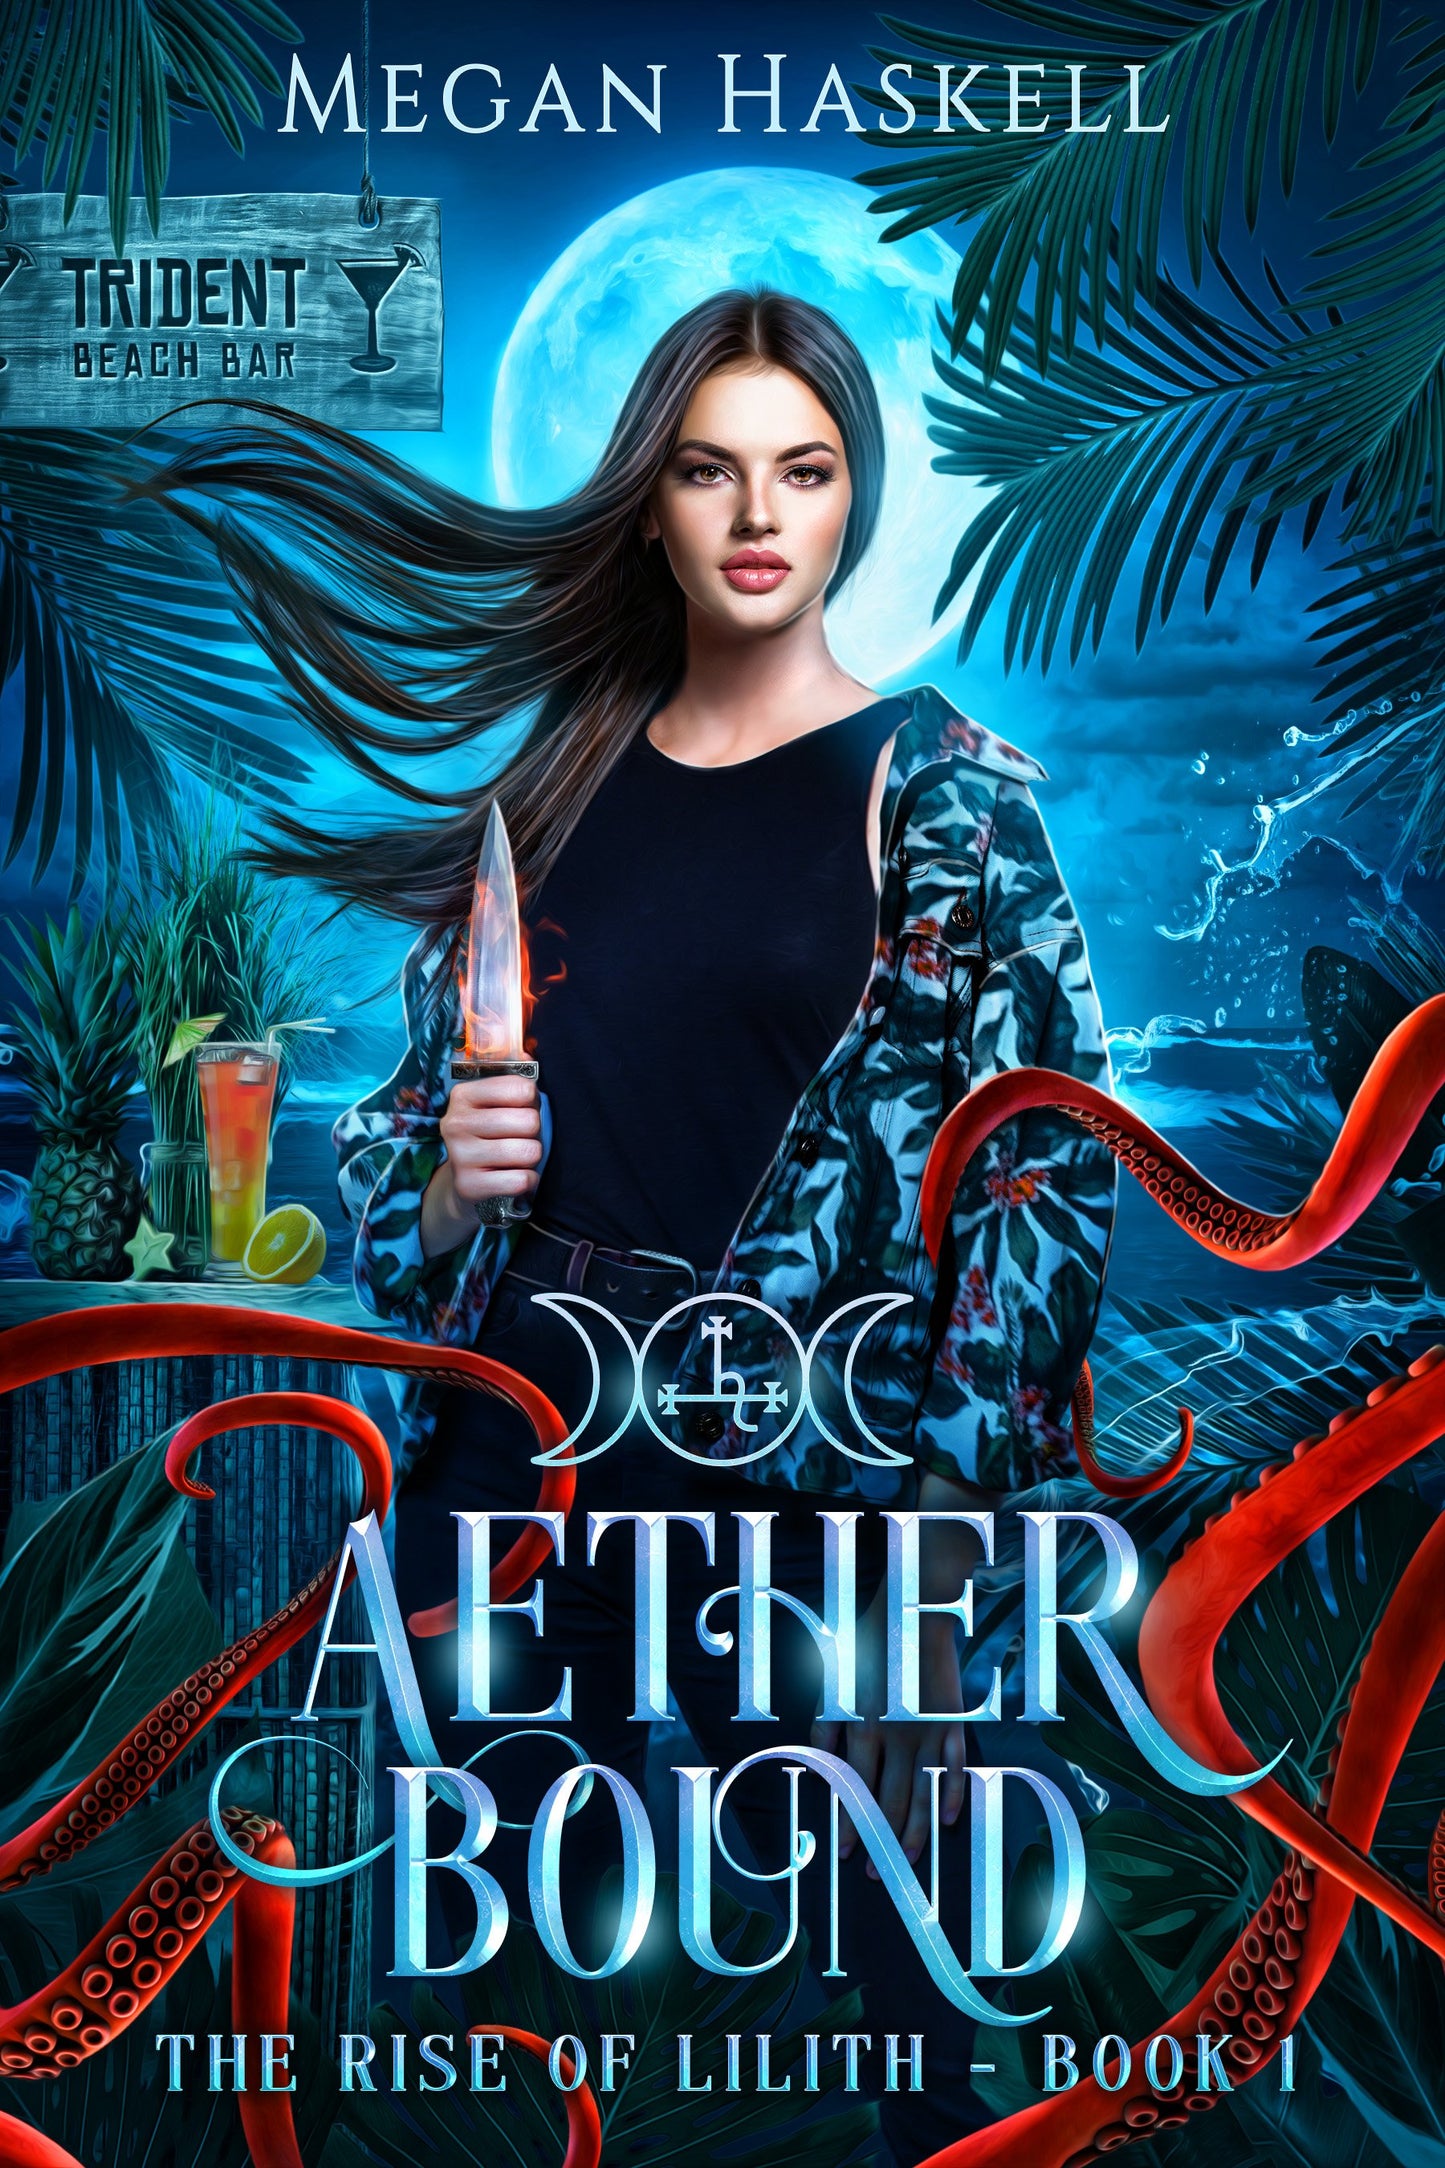 Aether Bound (Book 1) - Signed Paperback